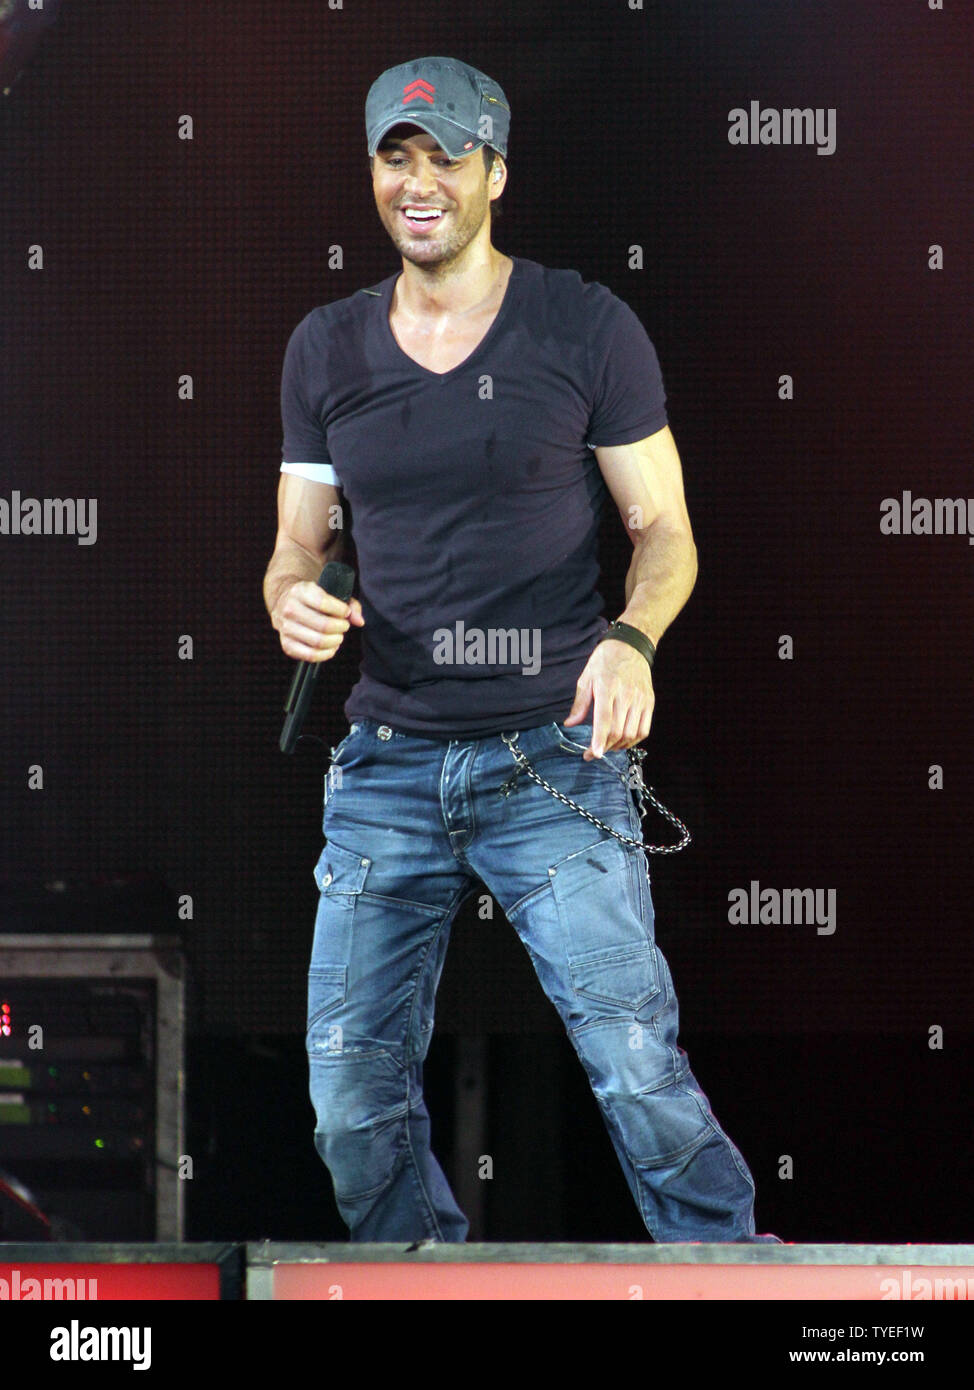 Enrique Iglesias performs in concert at the American Airlines Arena in Miami on August 31, 2012. UPI/Michael Bush Stock Photo